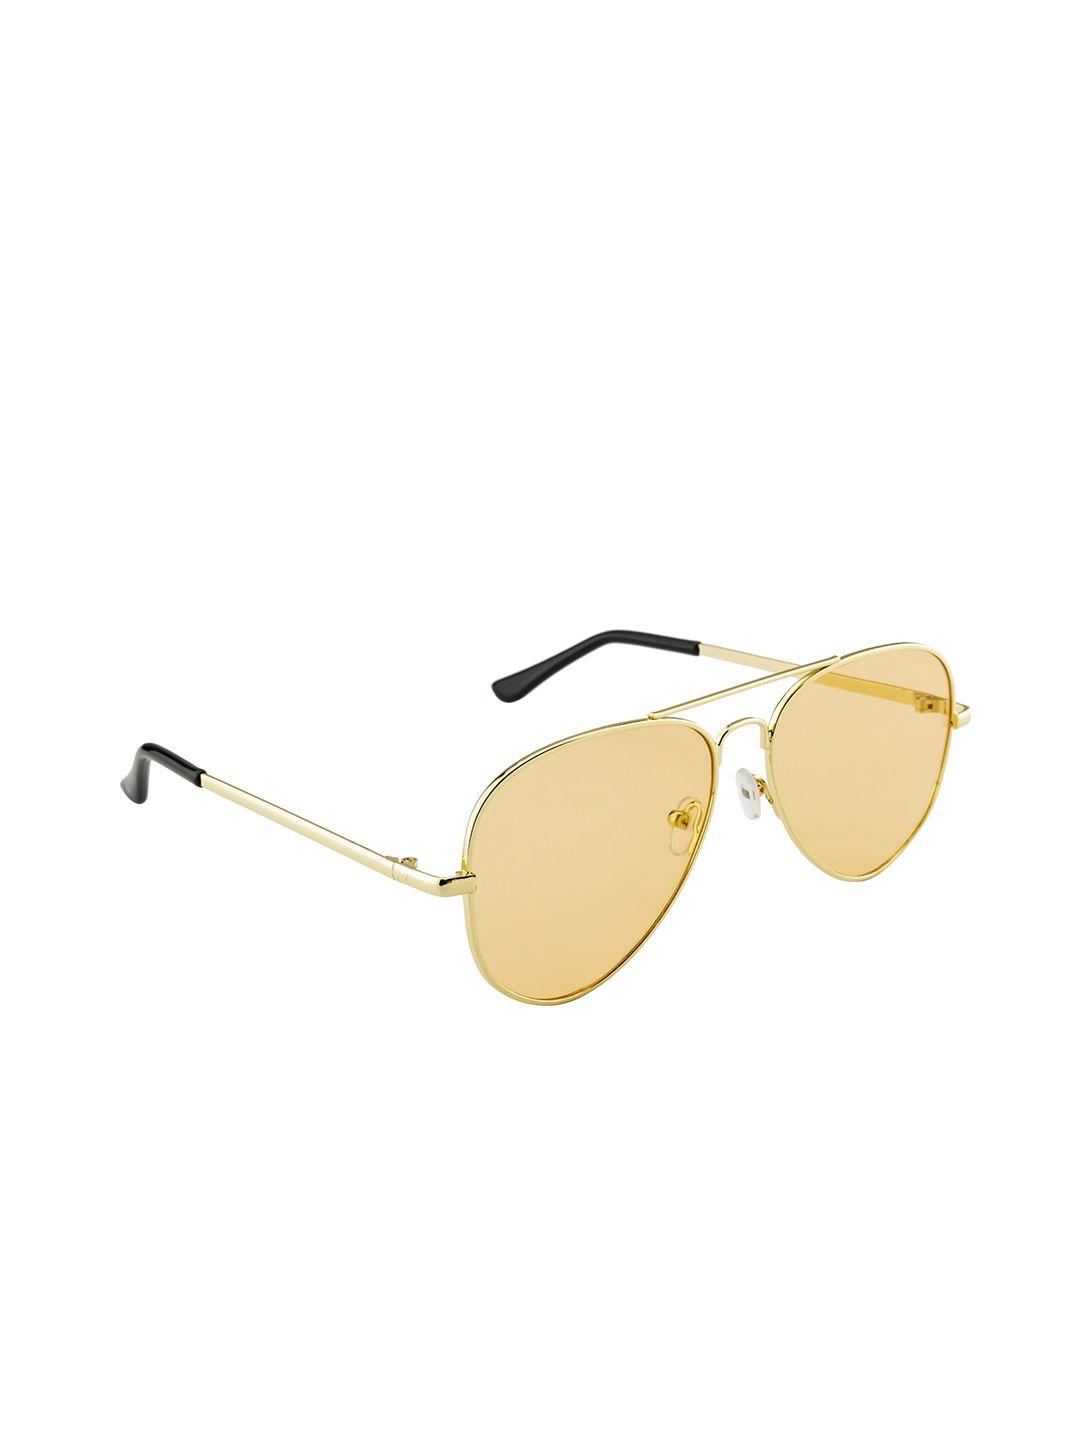 wrogn unisex aviator sunglasses with uv protected lens wr-ho923